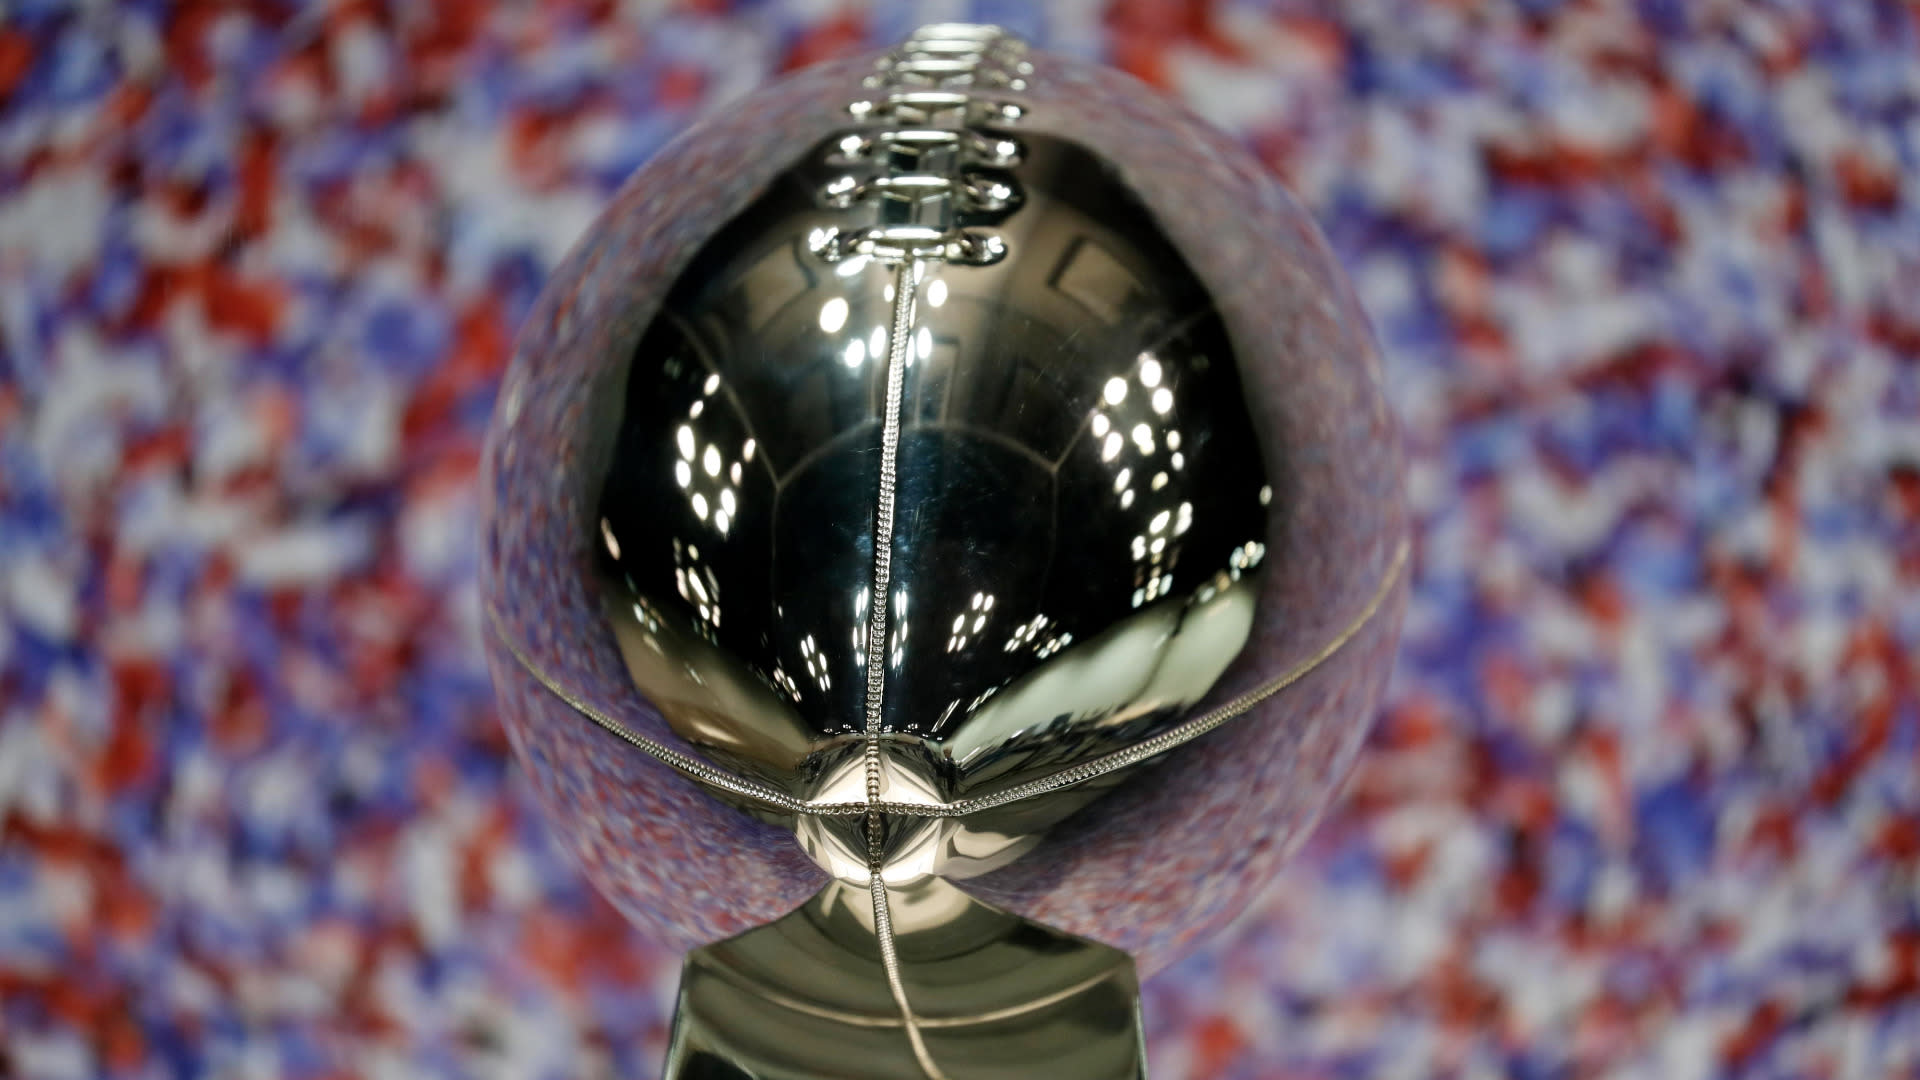 Super Bowl locations: 2020, 2021, 2022 and beyond